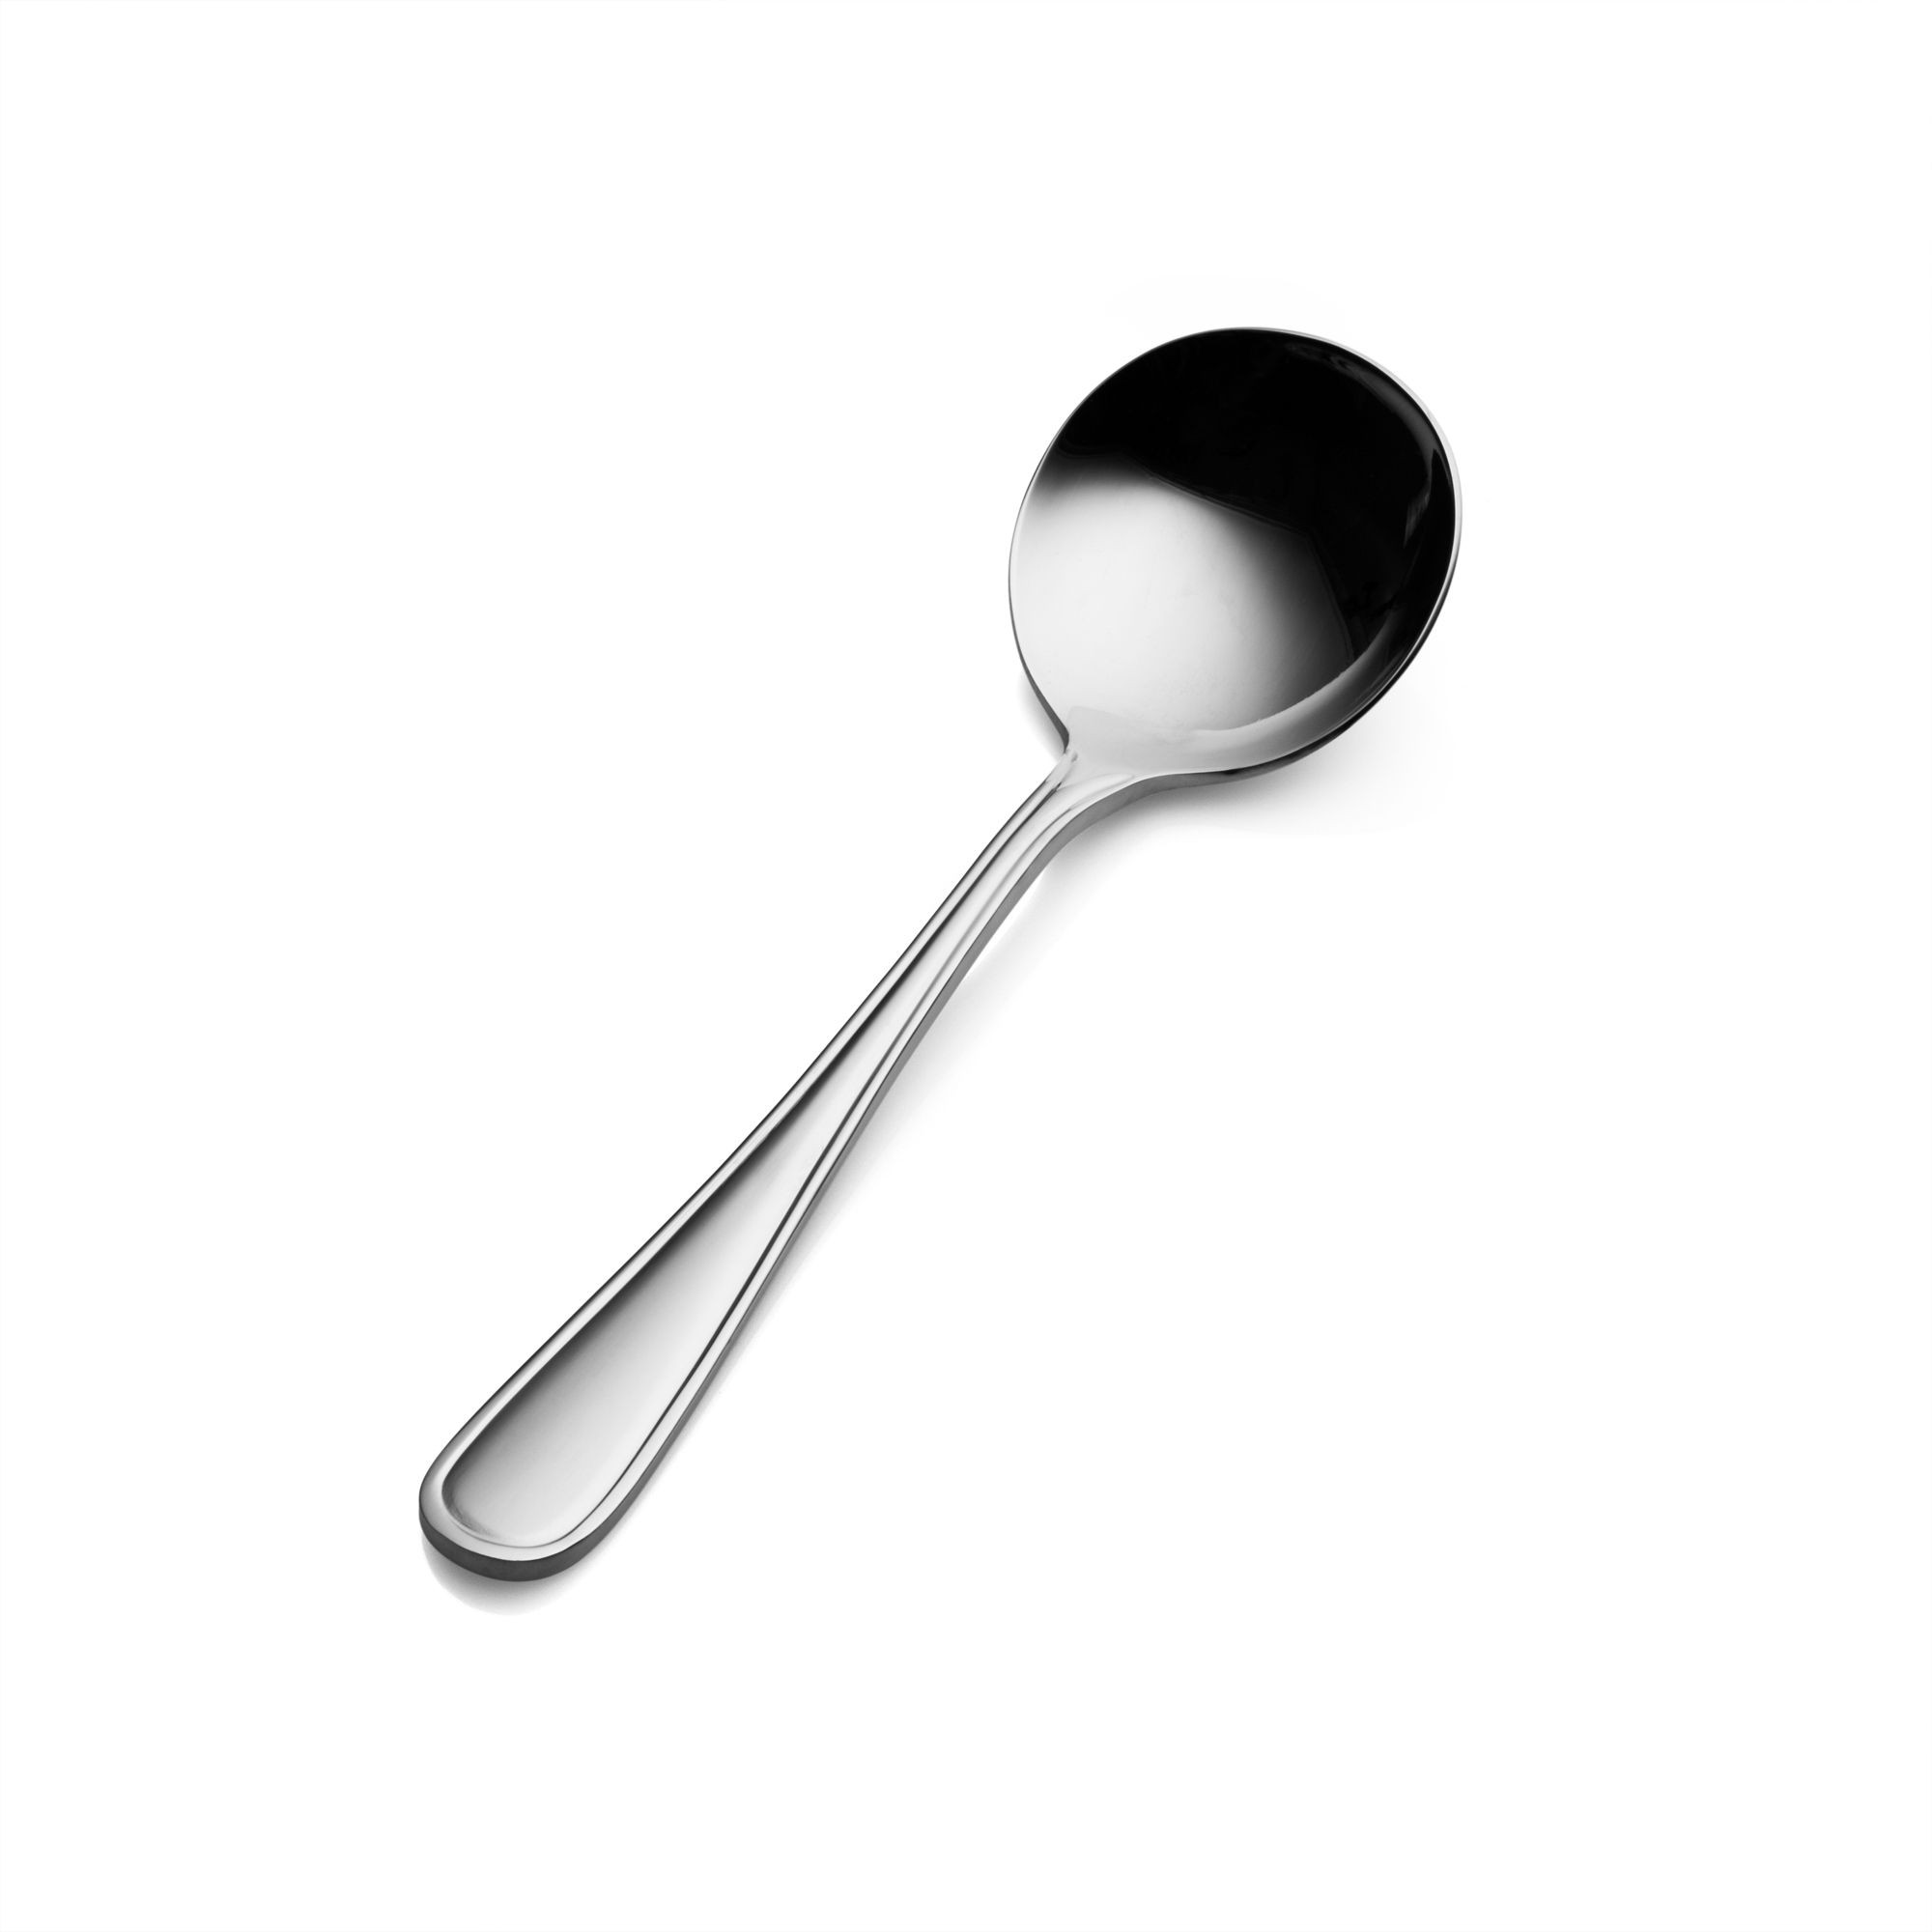 Bon Chef S301 Tuscany 18/8 Stainless Steel Bouillon Spoon